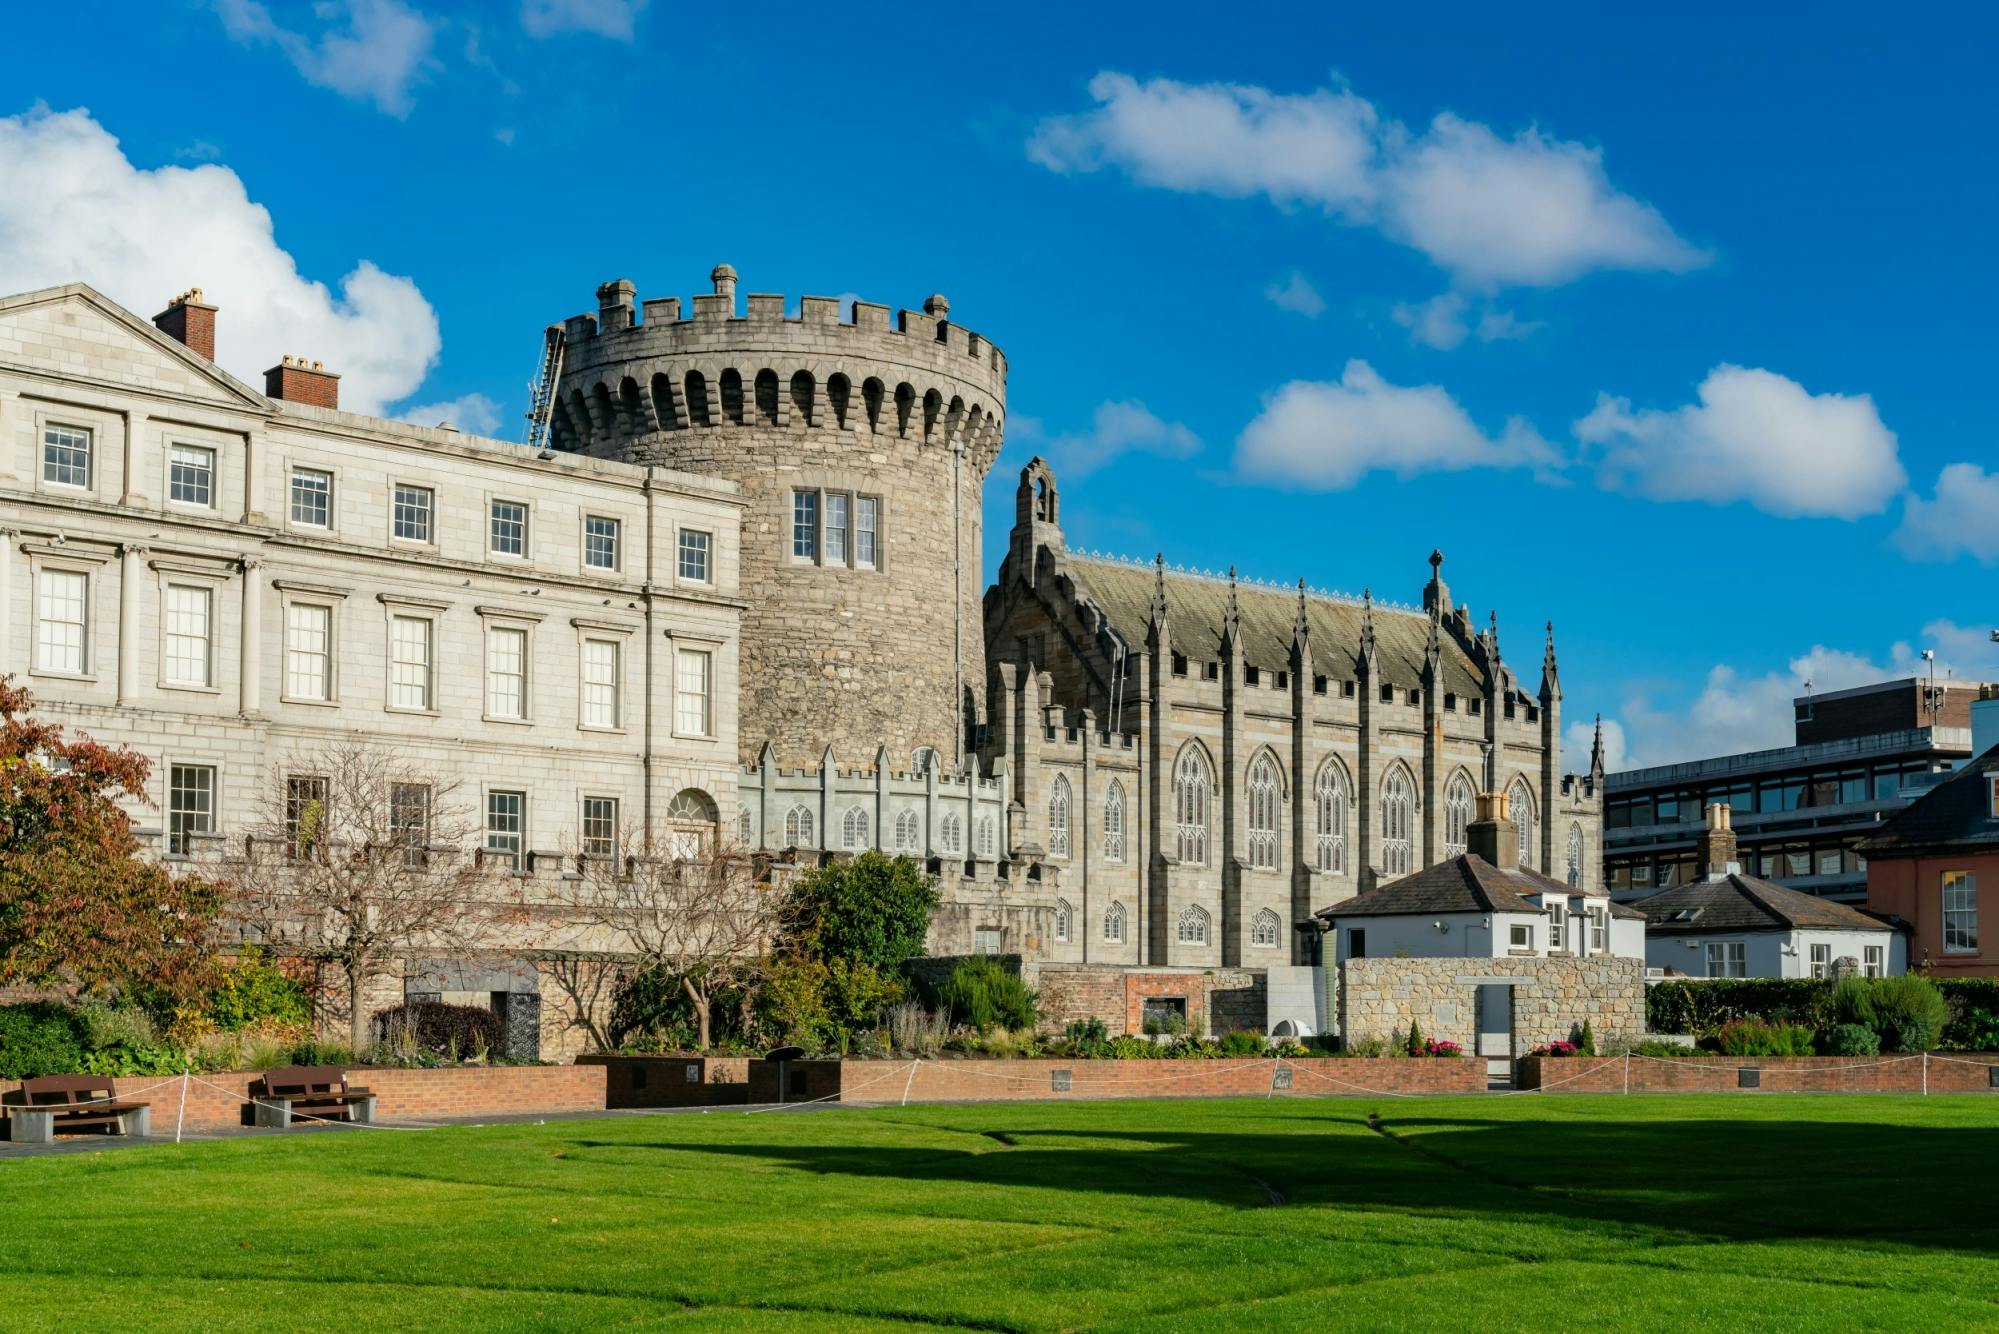 Dublin private custom tour with a local - see the city unscripted